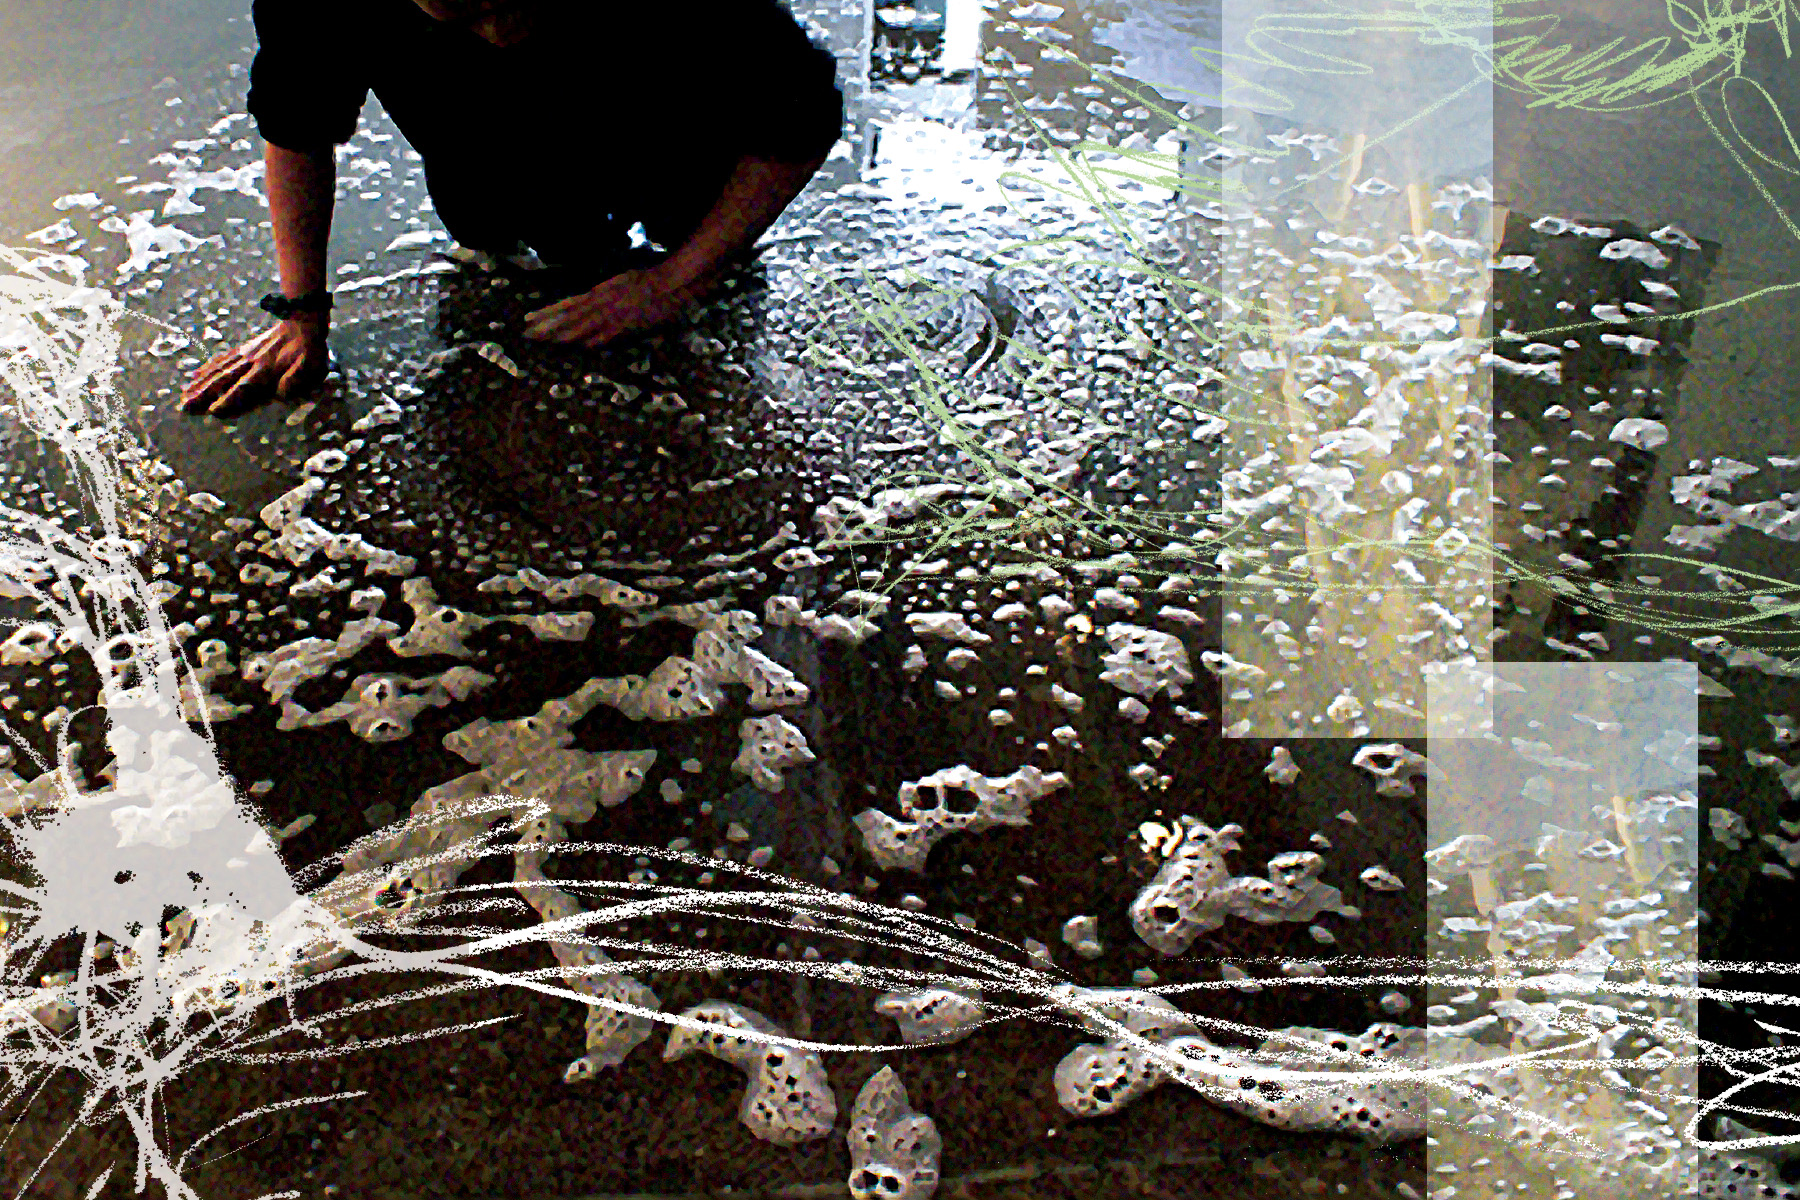 Photograph/digital collage of the bottom half of a person kneeling in a thin pool of foamy water.